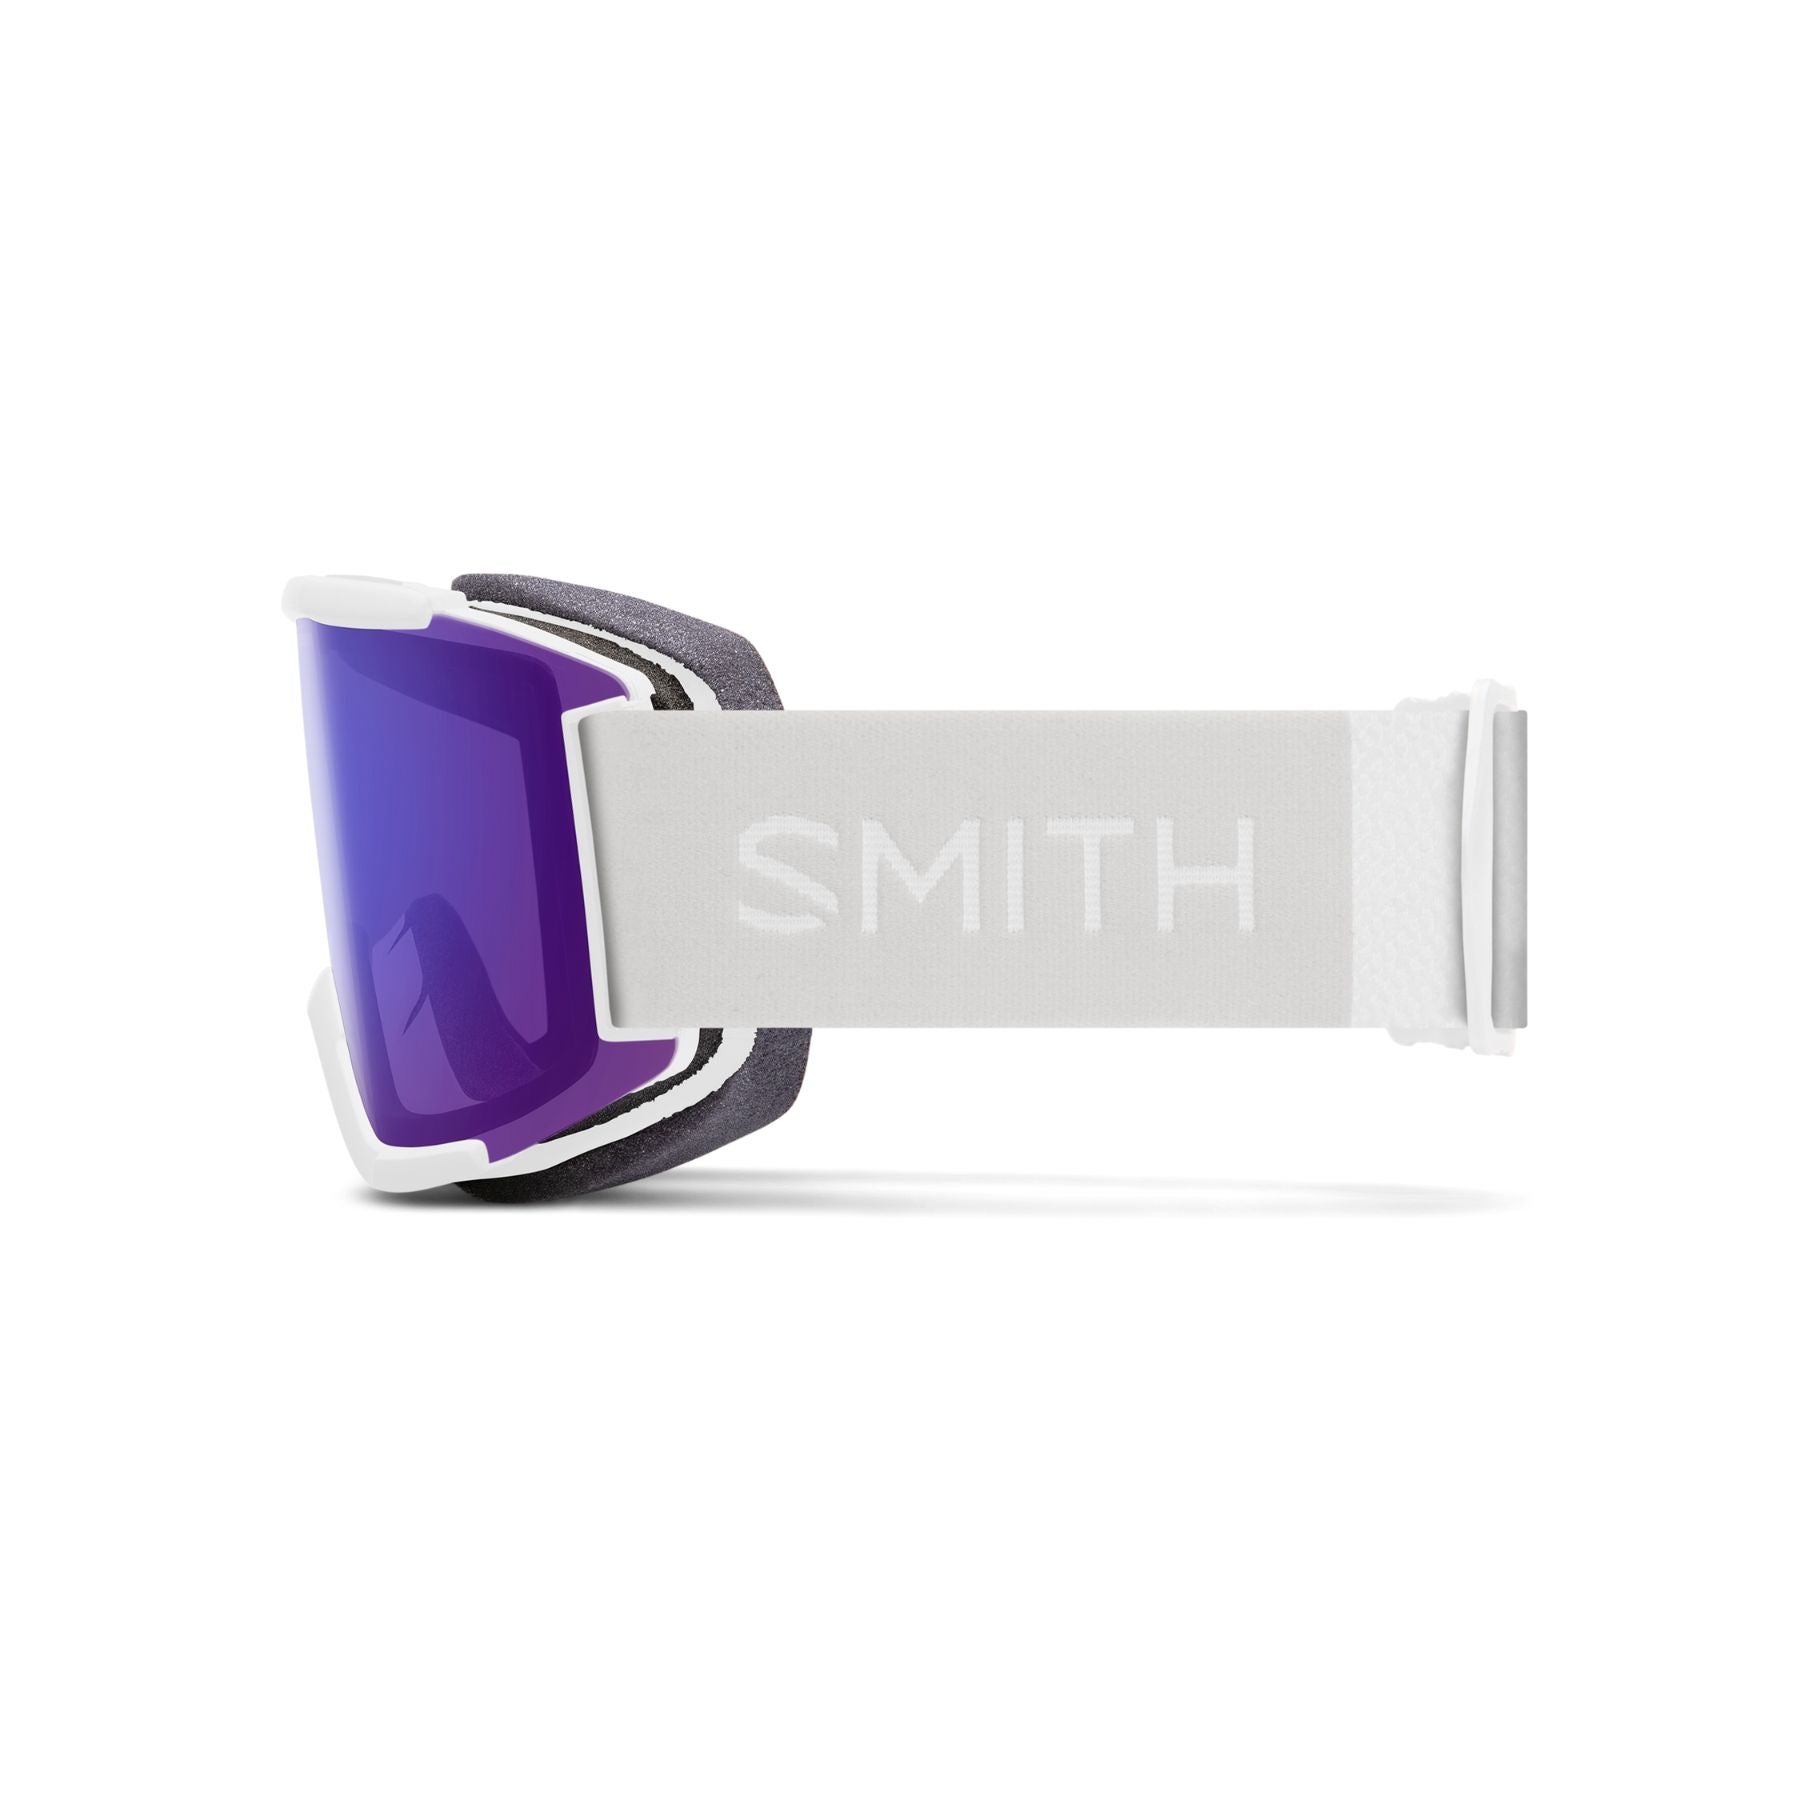 Smith Squad Goggles in White Vapour